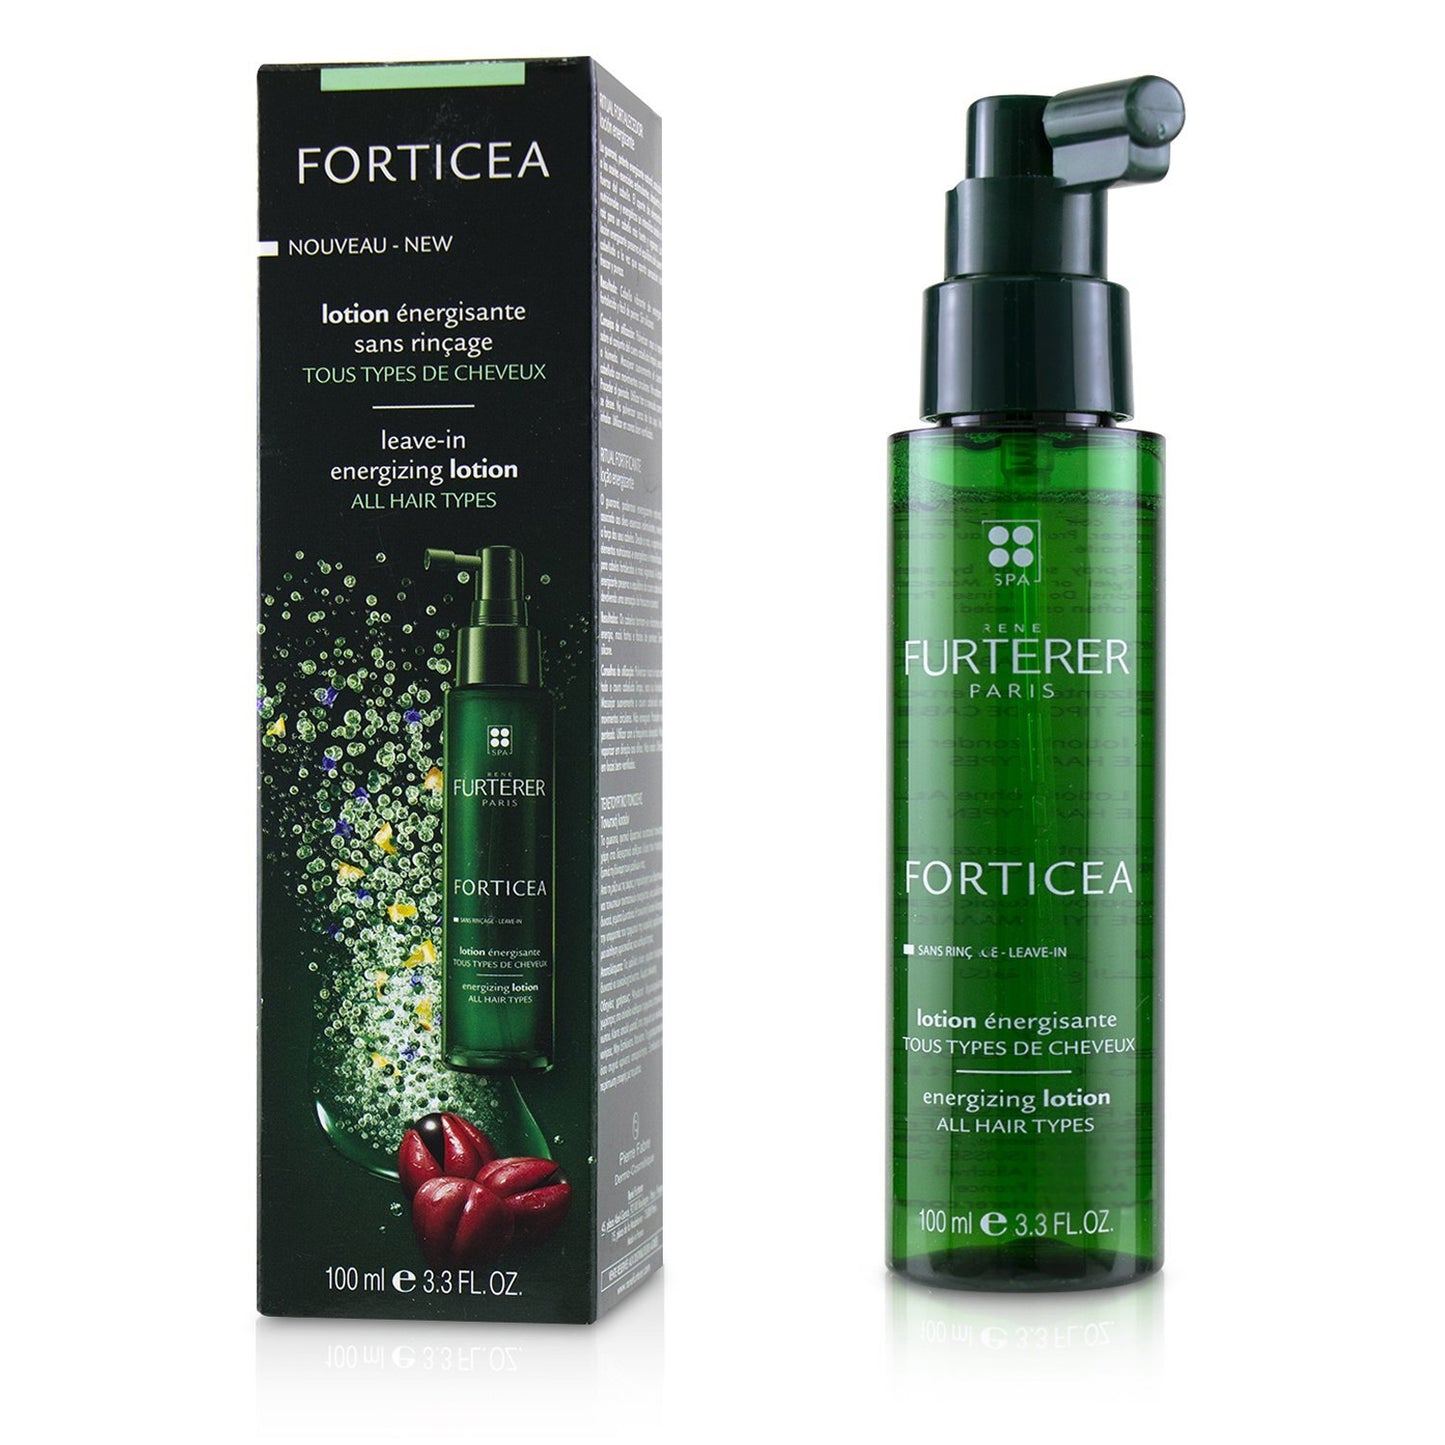 RENÉ FURTERER Forticea Leave-In Energizing Lotion (All Hair Types) 100ml